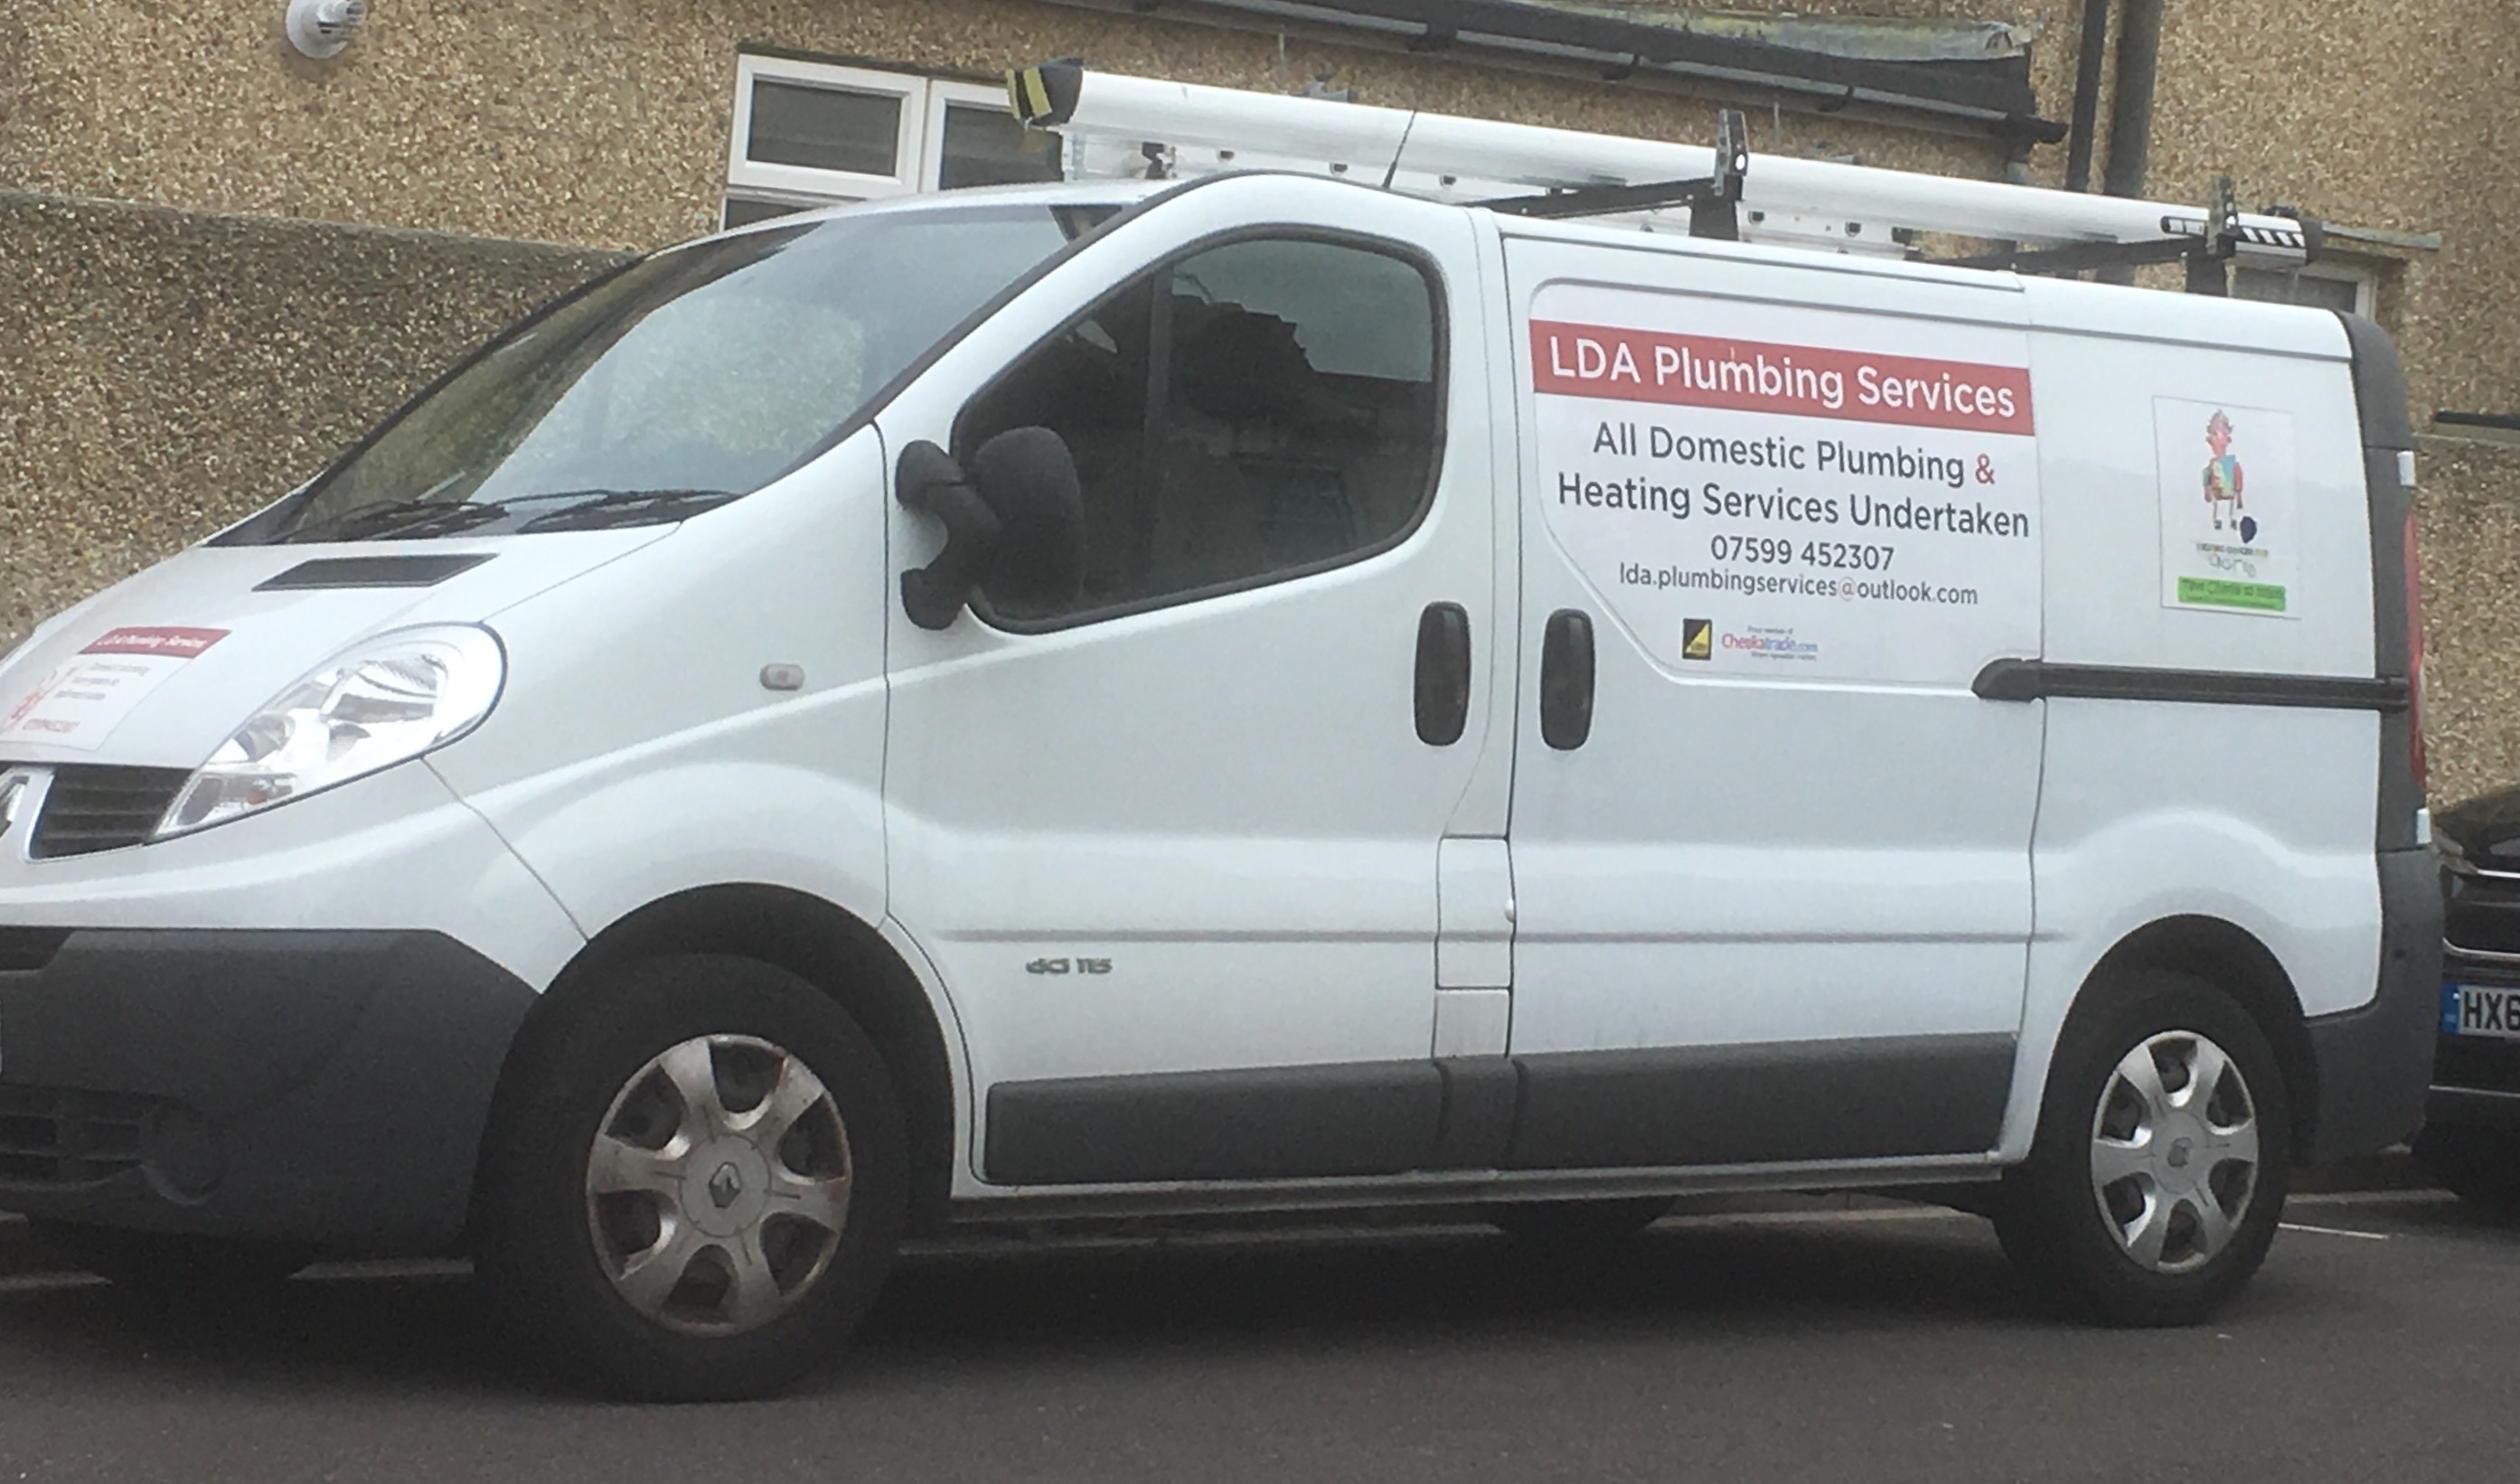 Main photo for LDA Plumbing Services